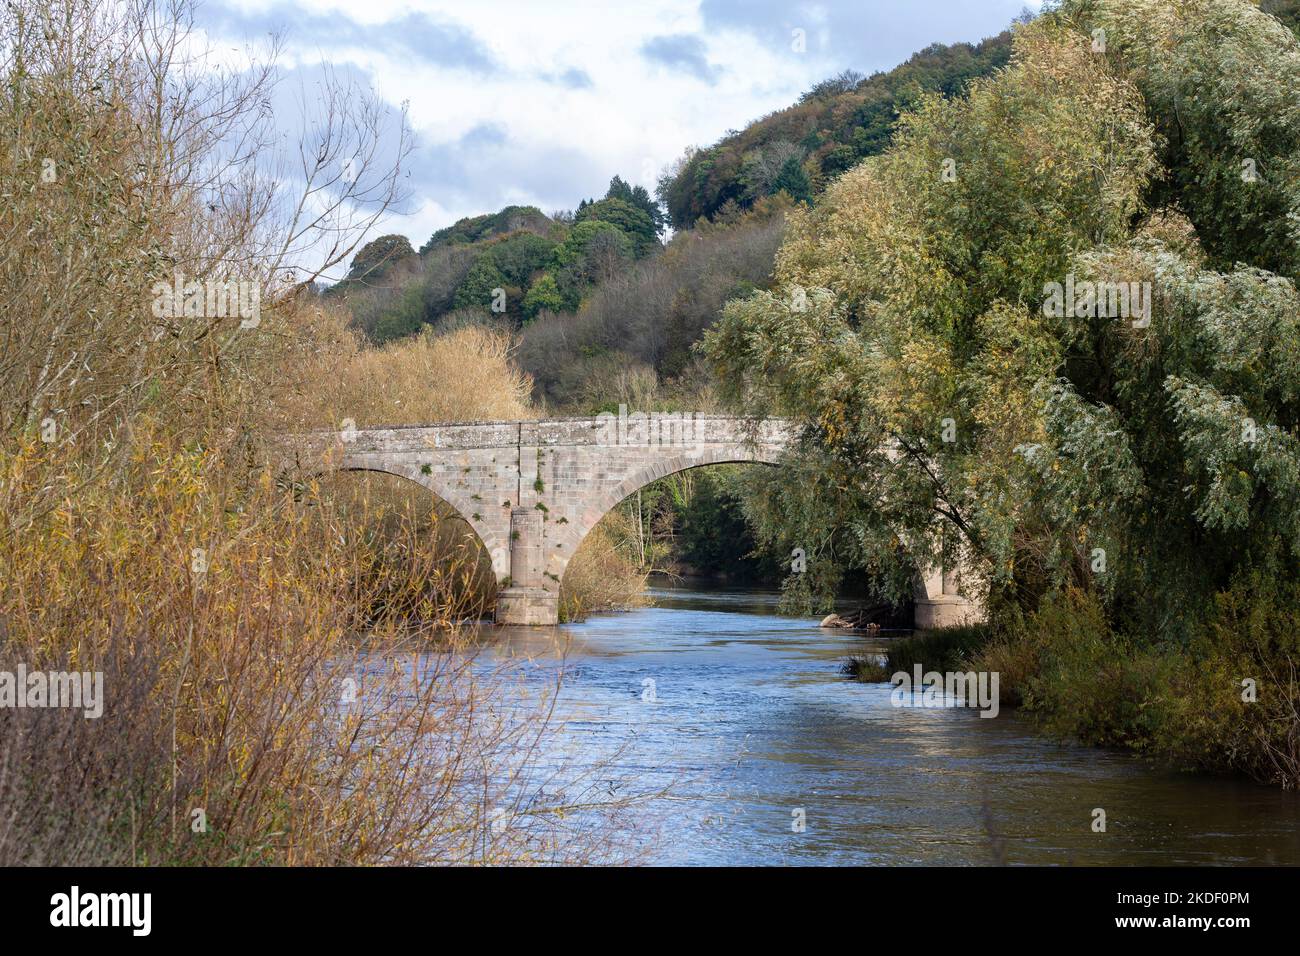 Kerne Bridge surrounded by Willow trees on the River Wye in Herefordshire, England.  Built 1825-28. A scheduled monument. Stock Photo